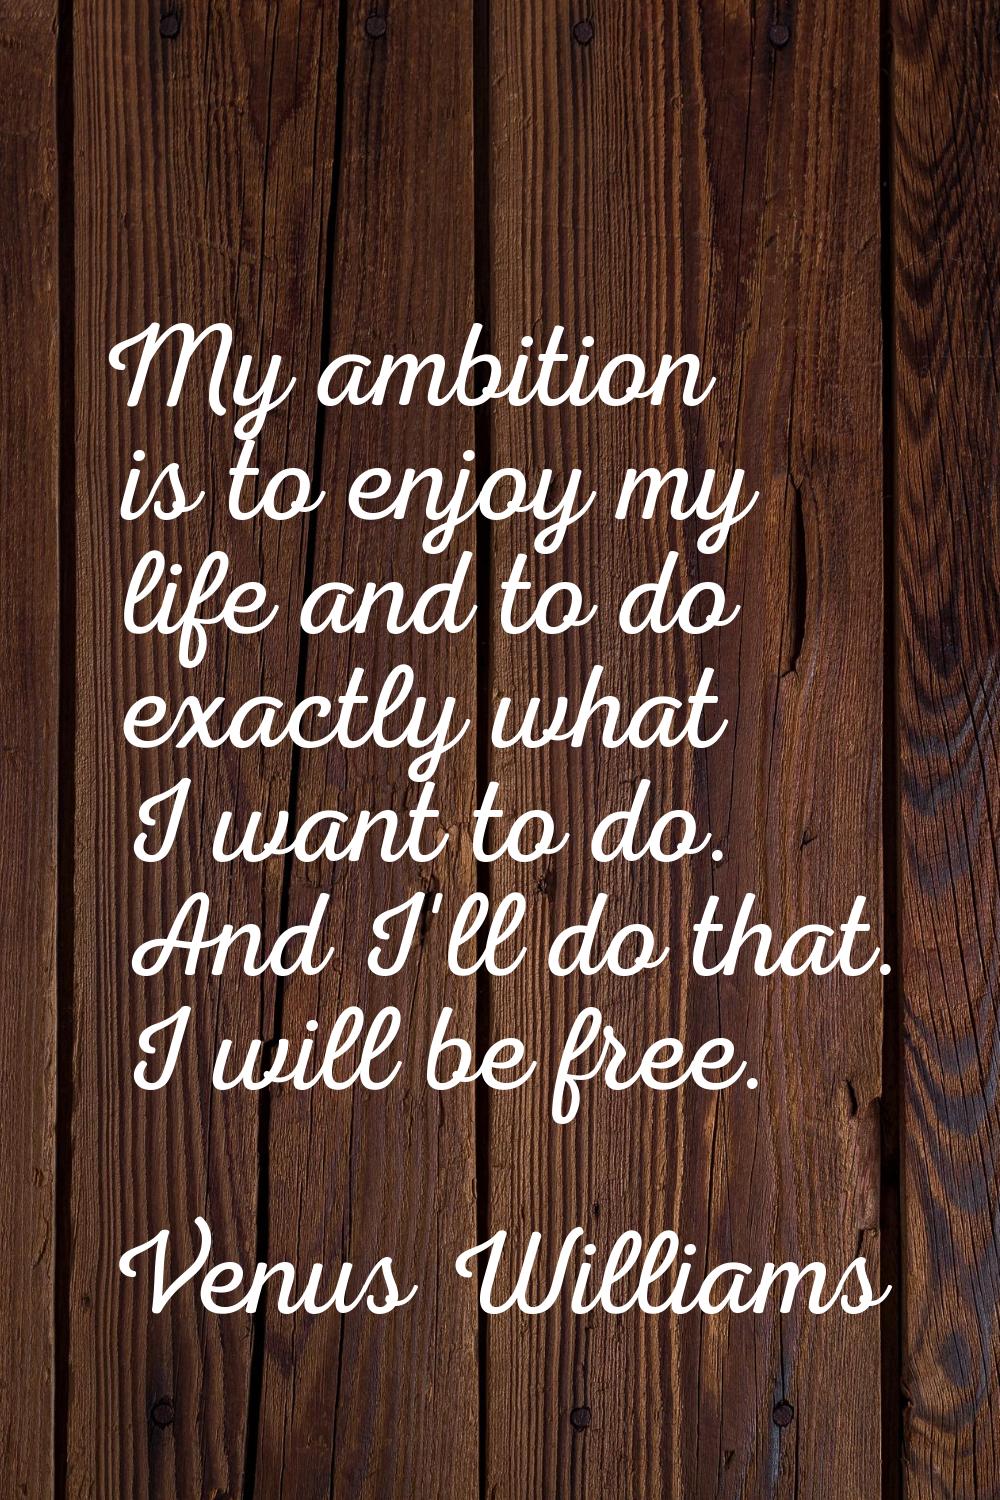 My ambition is to enjoy my life and to do exactly what I want to do. And I'll do that. I will be fr